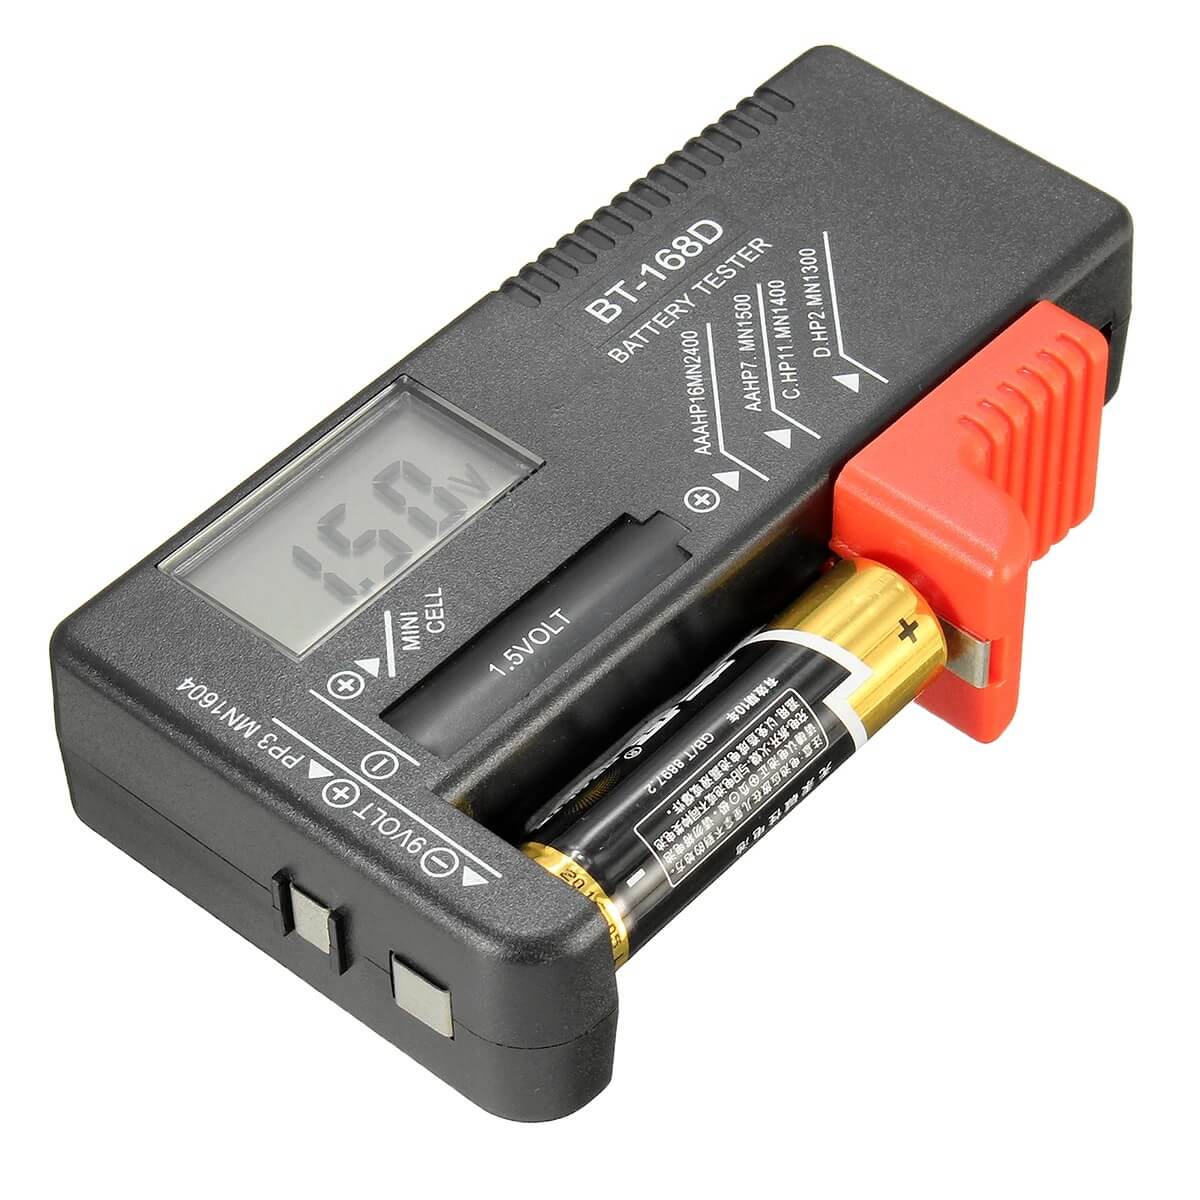 Universal Digital Battery Tester | Cell Charge Checker for AA AAA C D 9V 1.5V Button Cell BT-168D Batteries